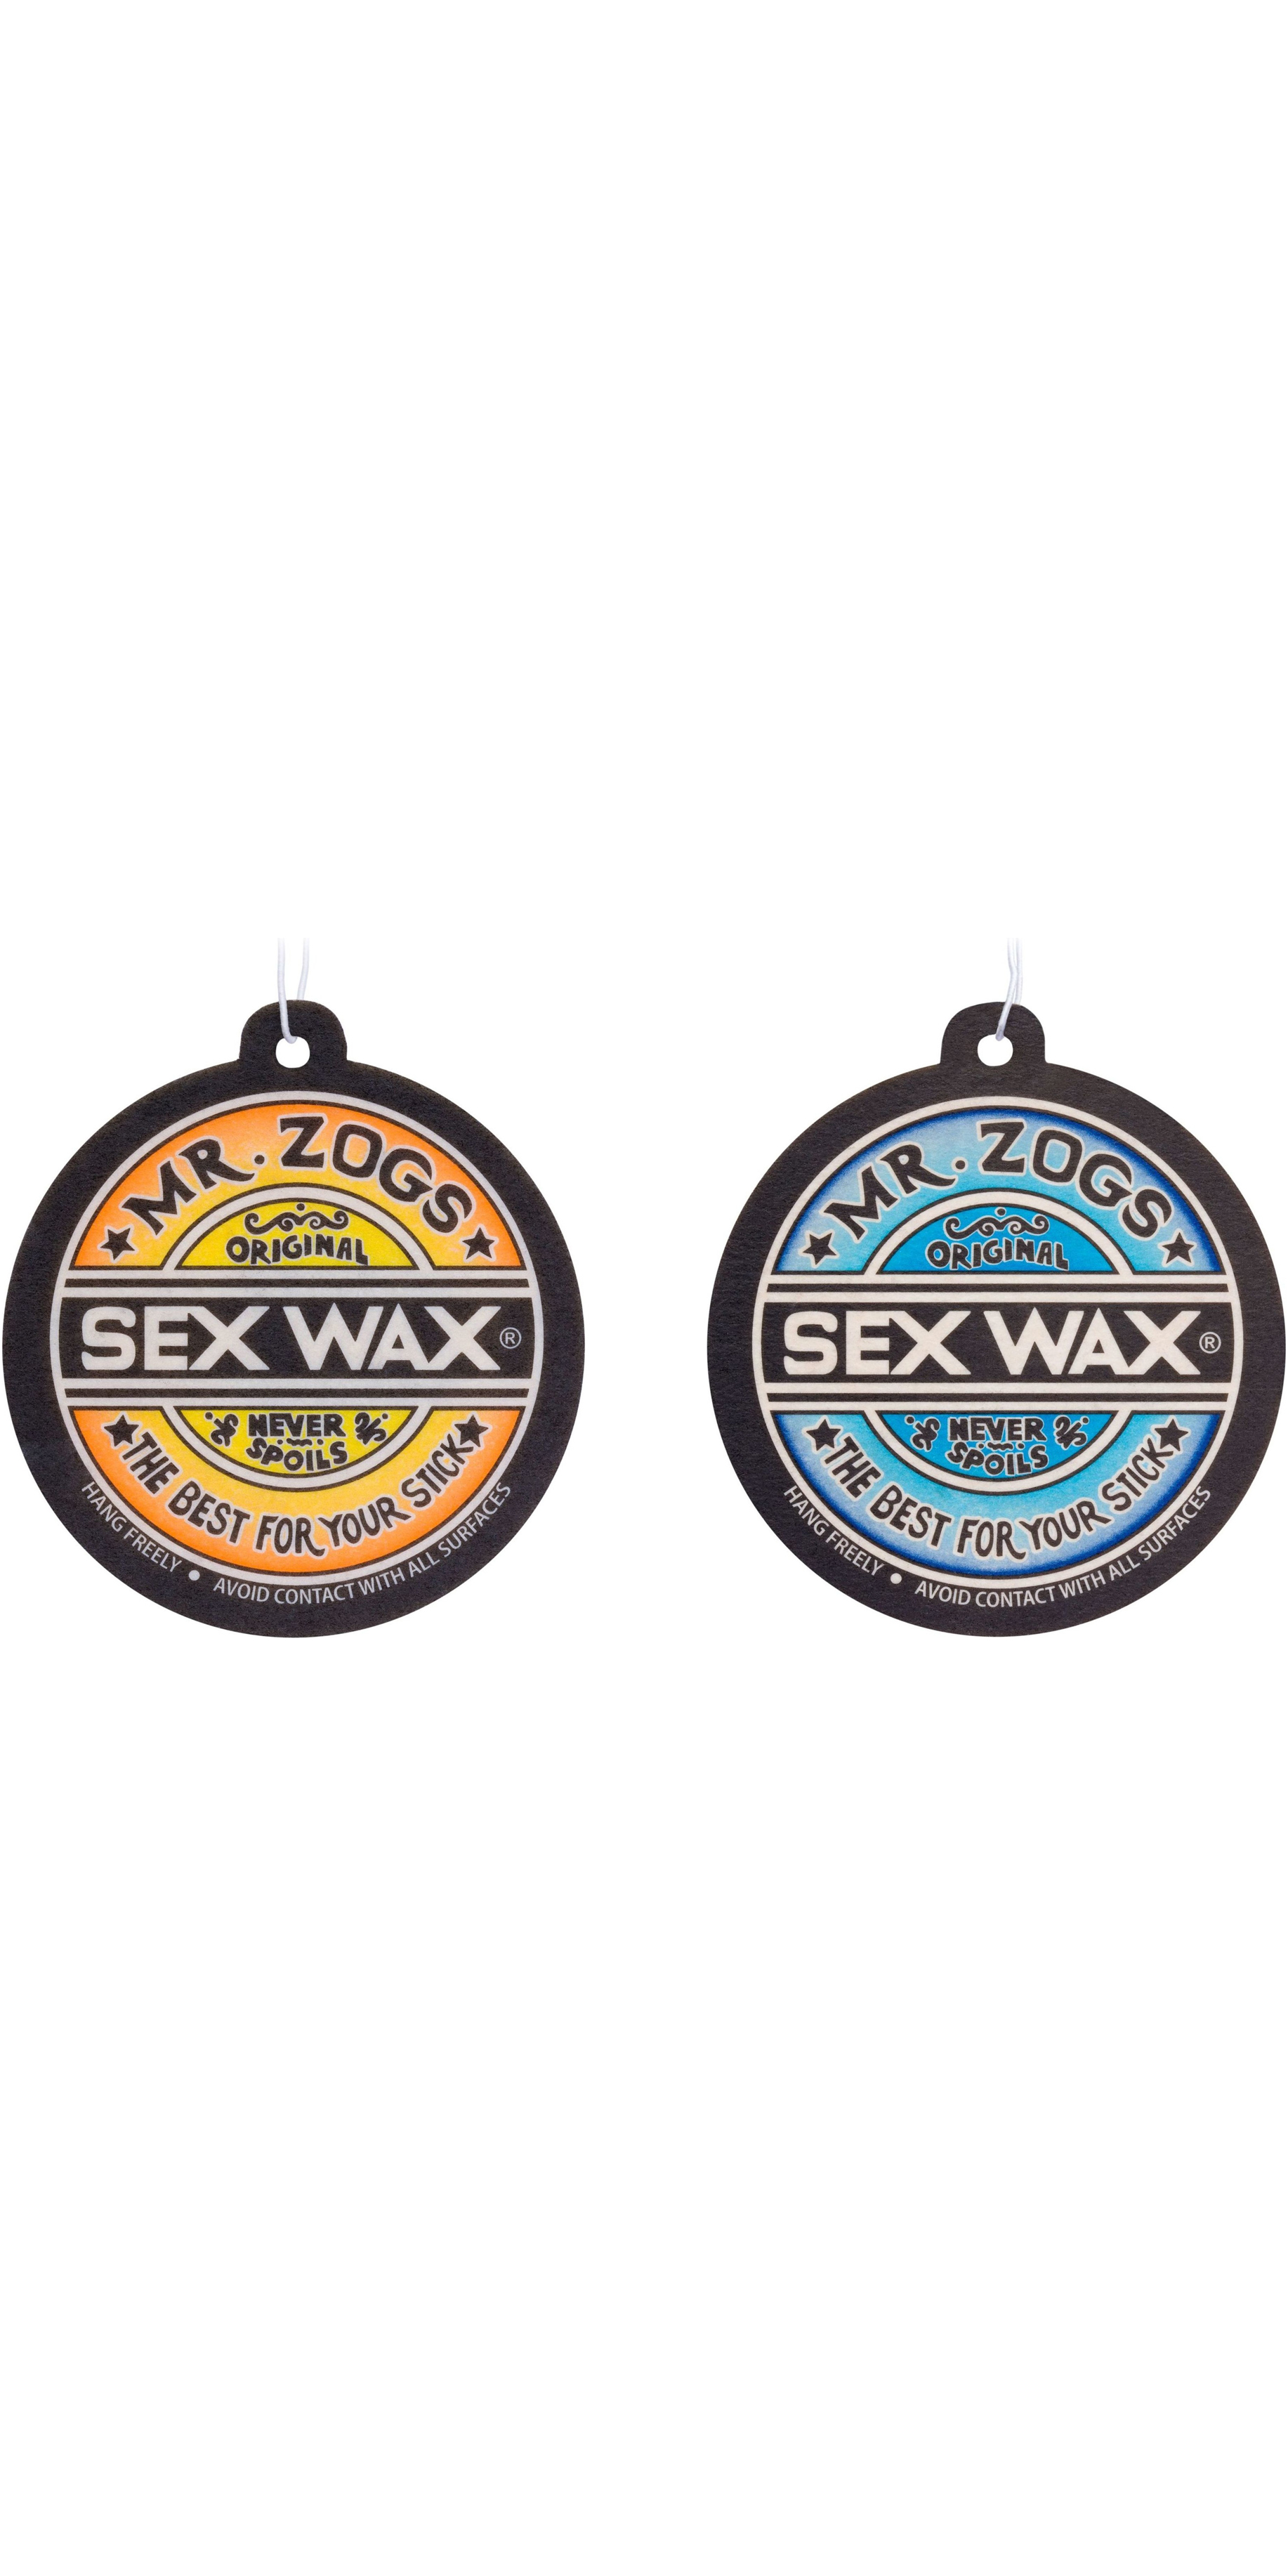 Mr Zogs 2024 Sex Wax Air Freshener Bundle - Coconut and Grape